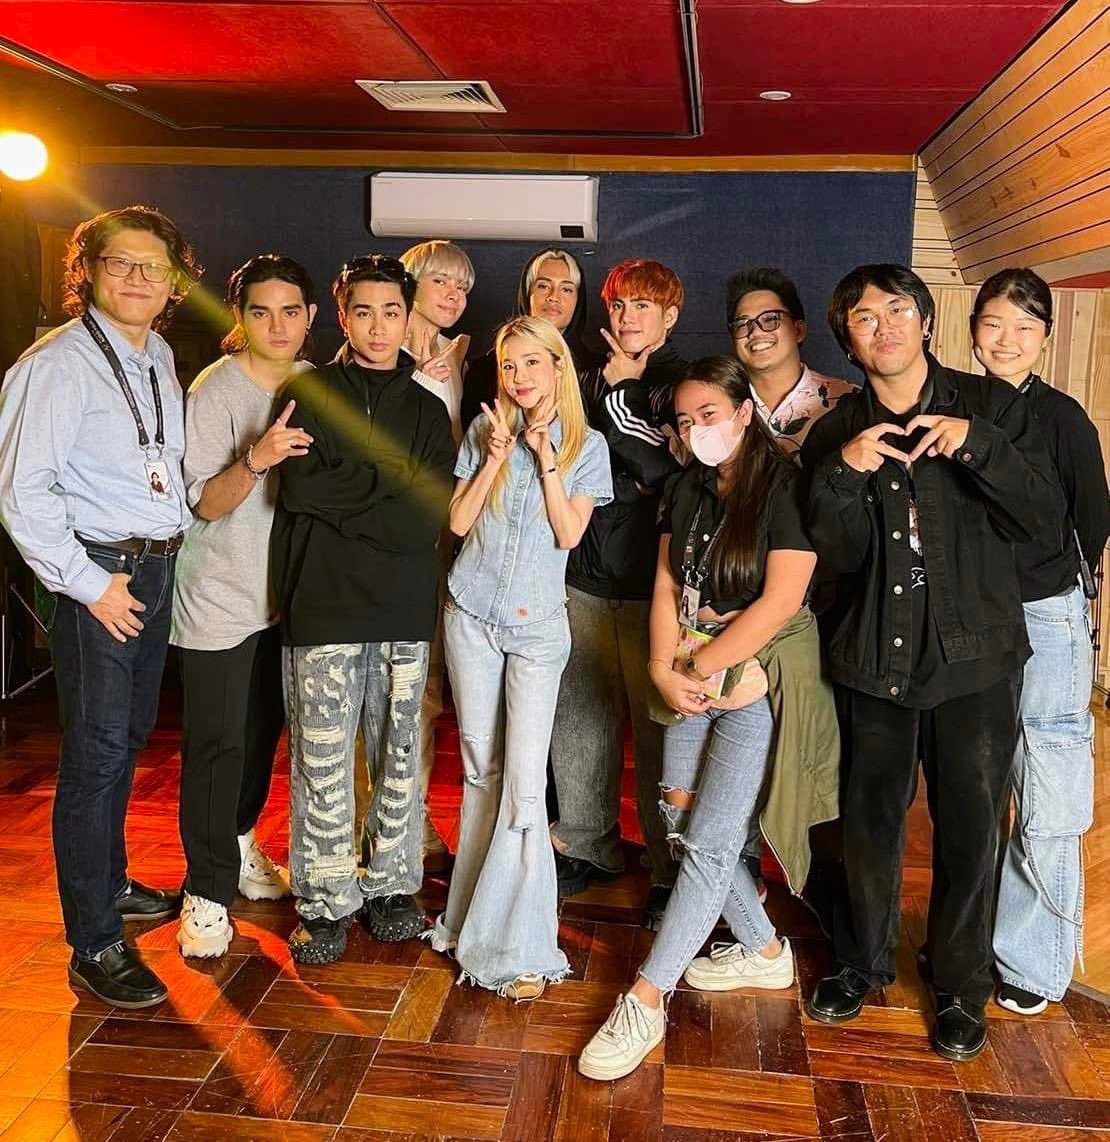 DARA at Wild Grass Studios Philippines post

'Great to have SB19 and Sandara Park here at Wild Grass Studios! Watch out for their upcoming collab, it's going to be explosive!

#wildgrassstudios #recordingstudio #recordingsession #videoshoot'

#SandaraPark #산다라박